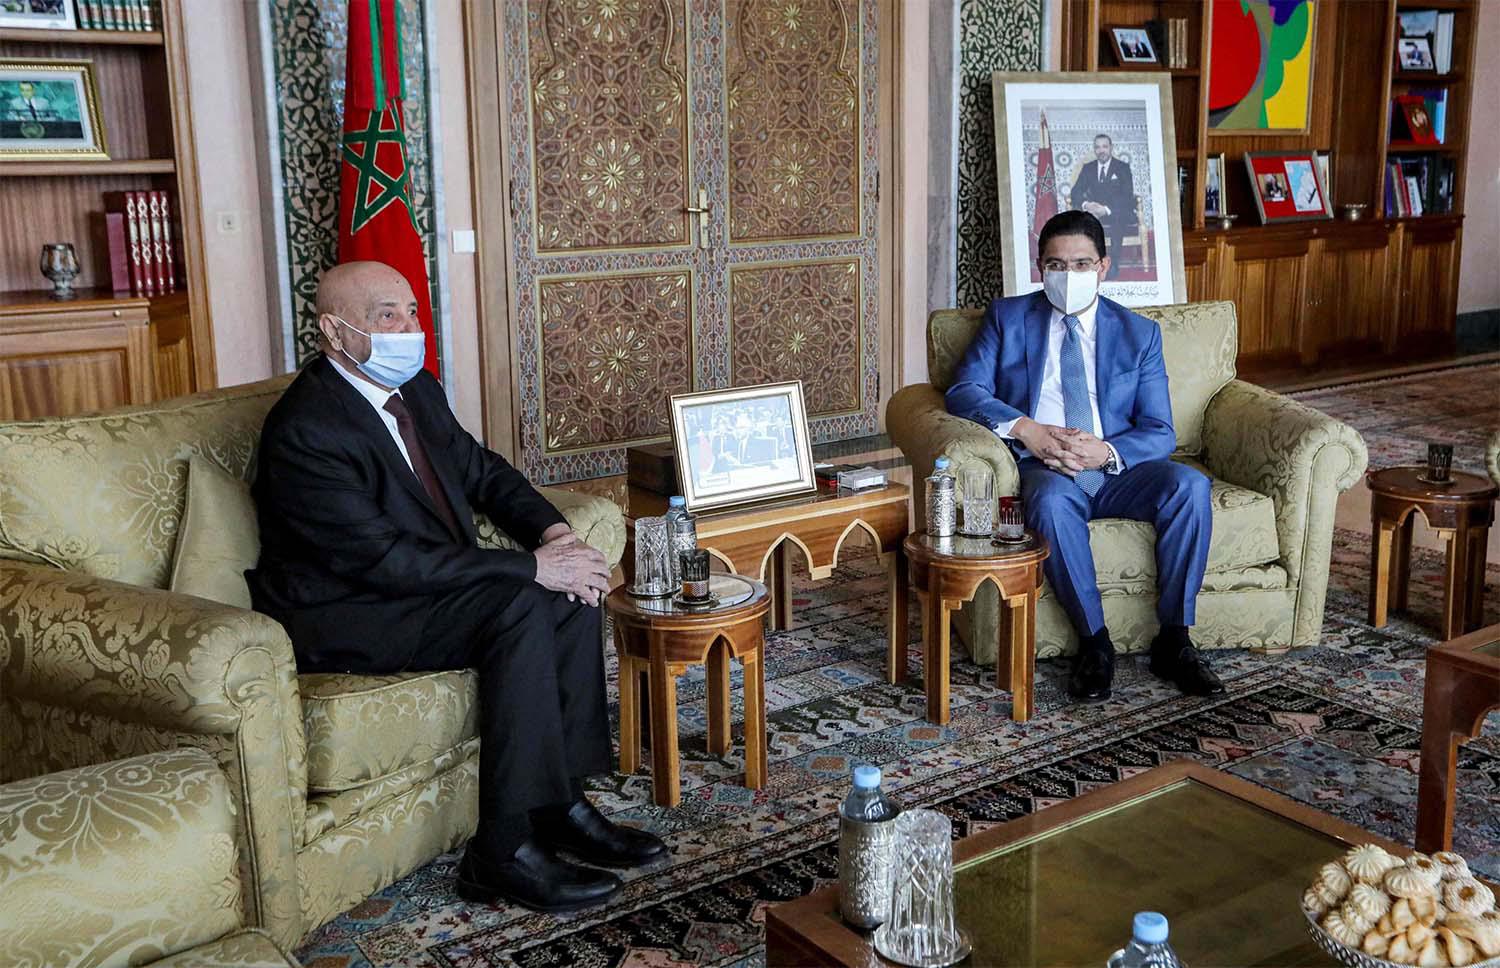 The visit of Libya's parliament speaker Aguila Saleh to Morocco is the second in less than a month 